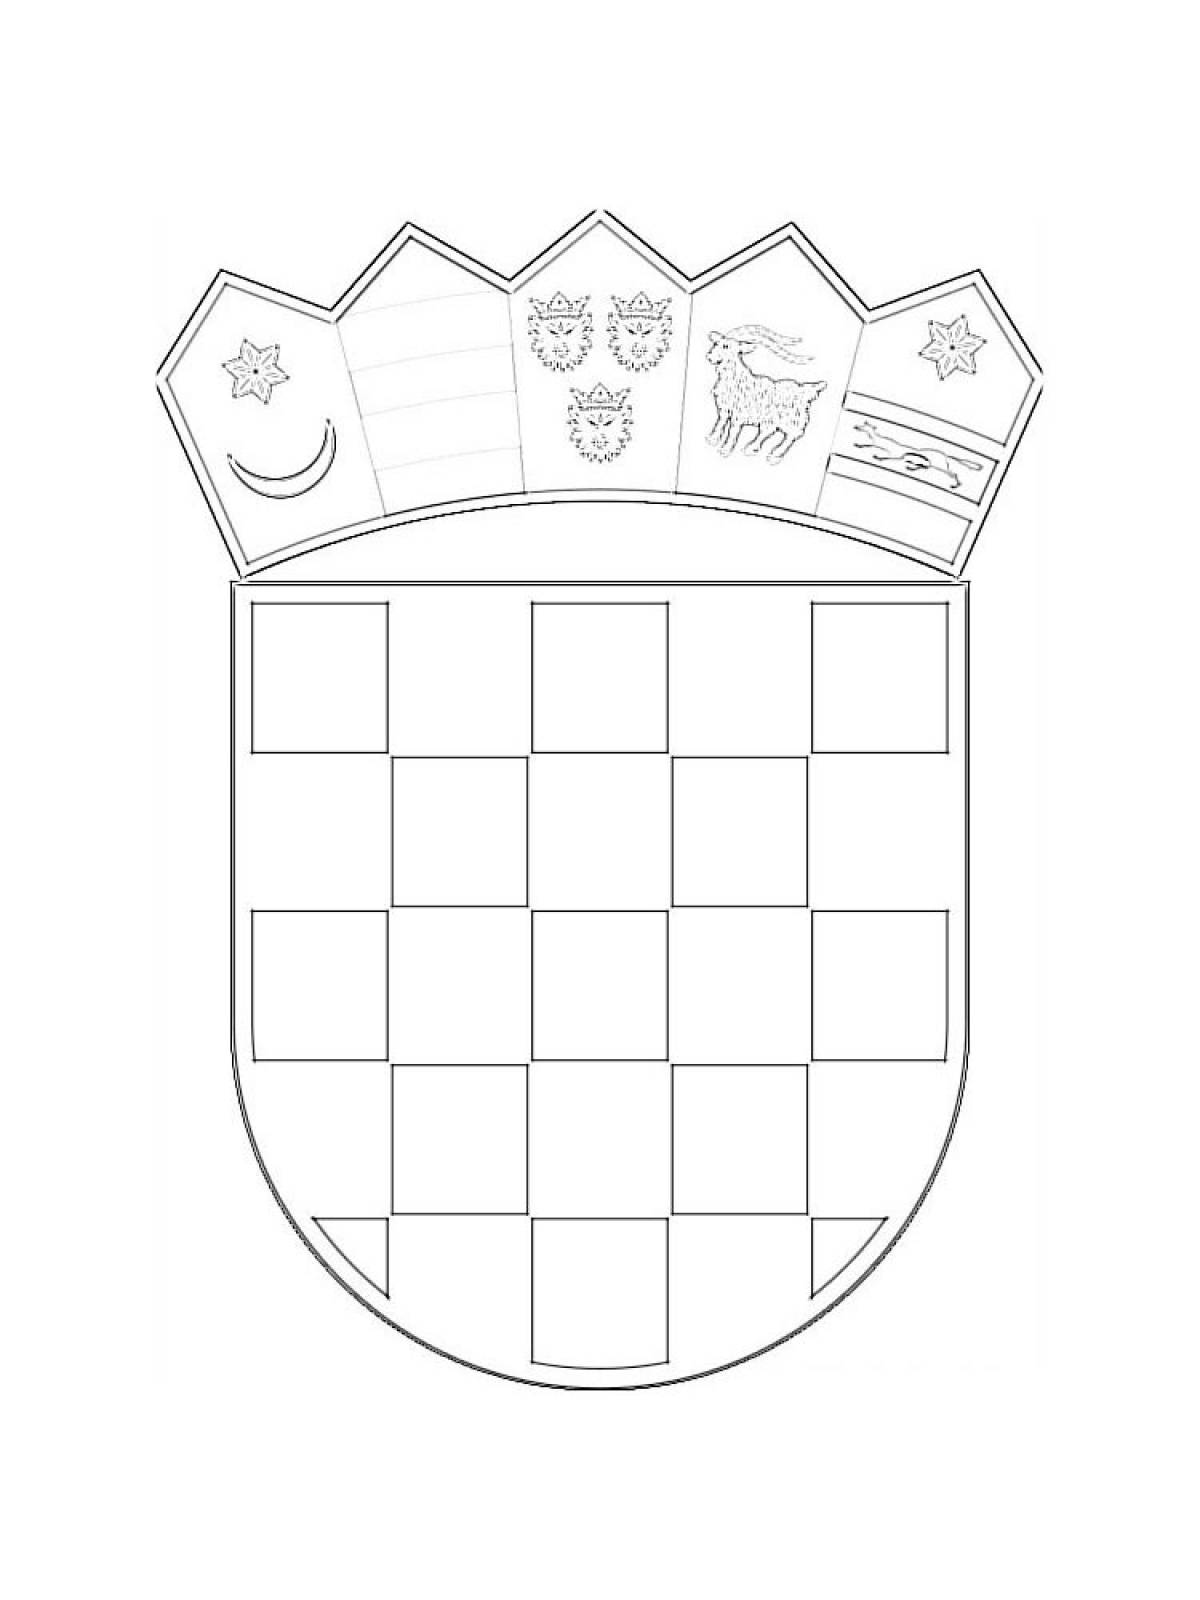 Coats of arms coloring page